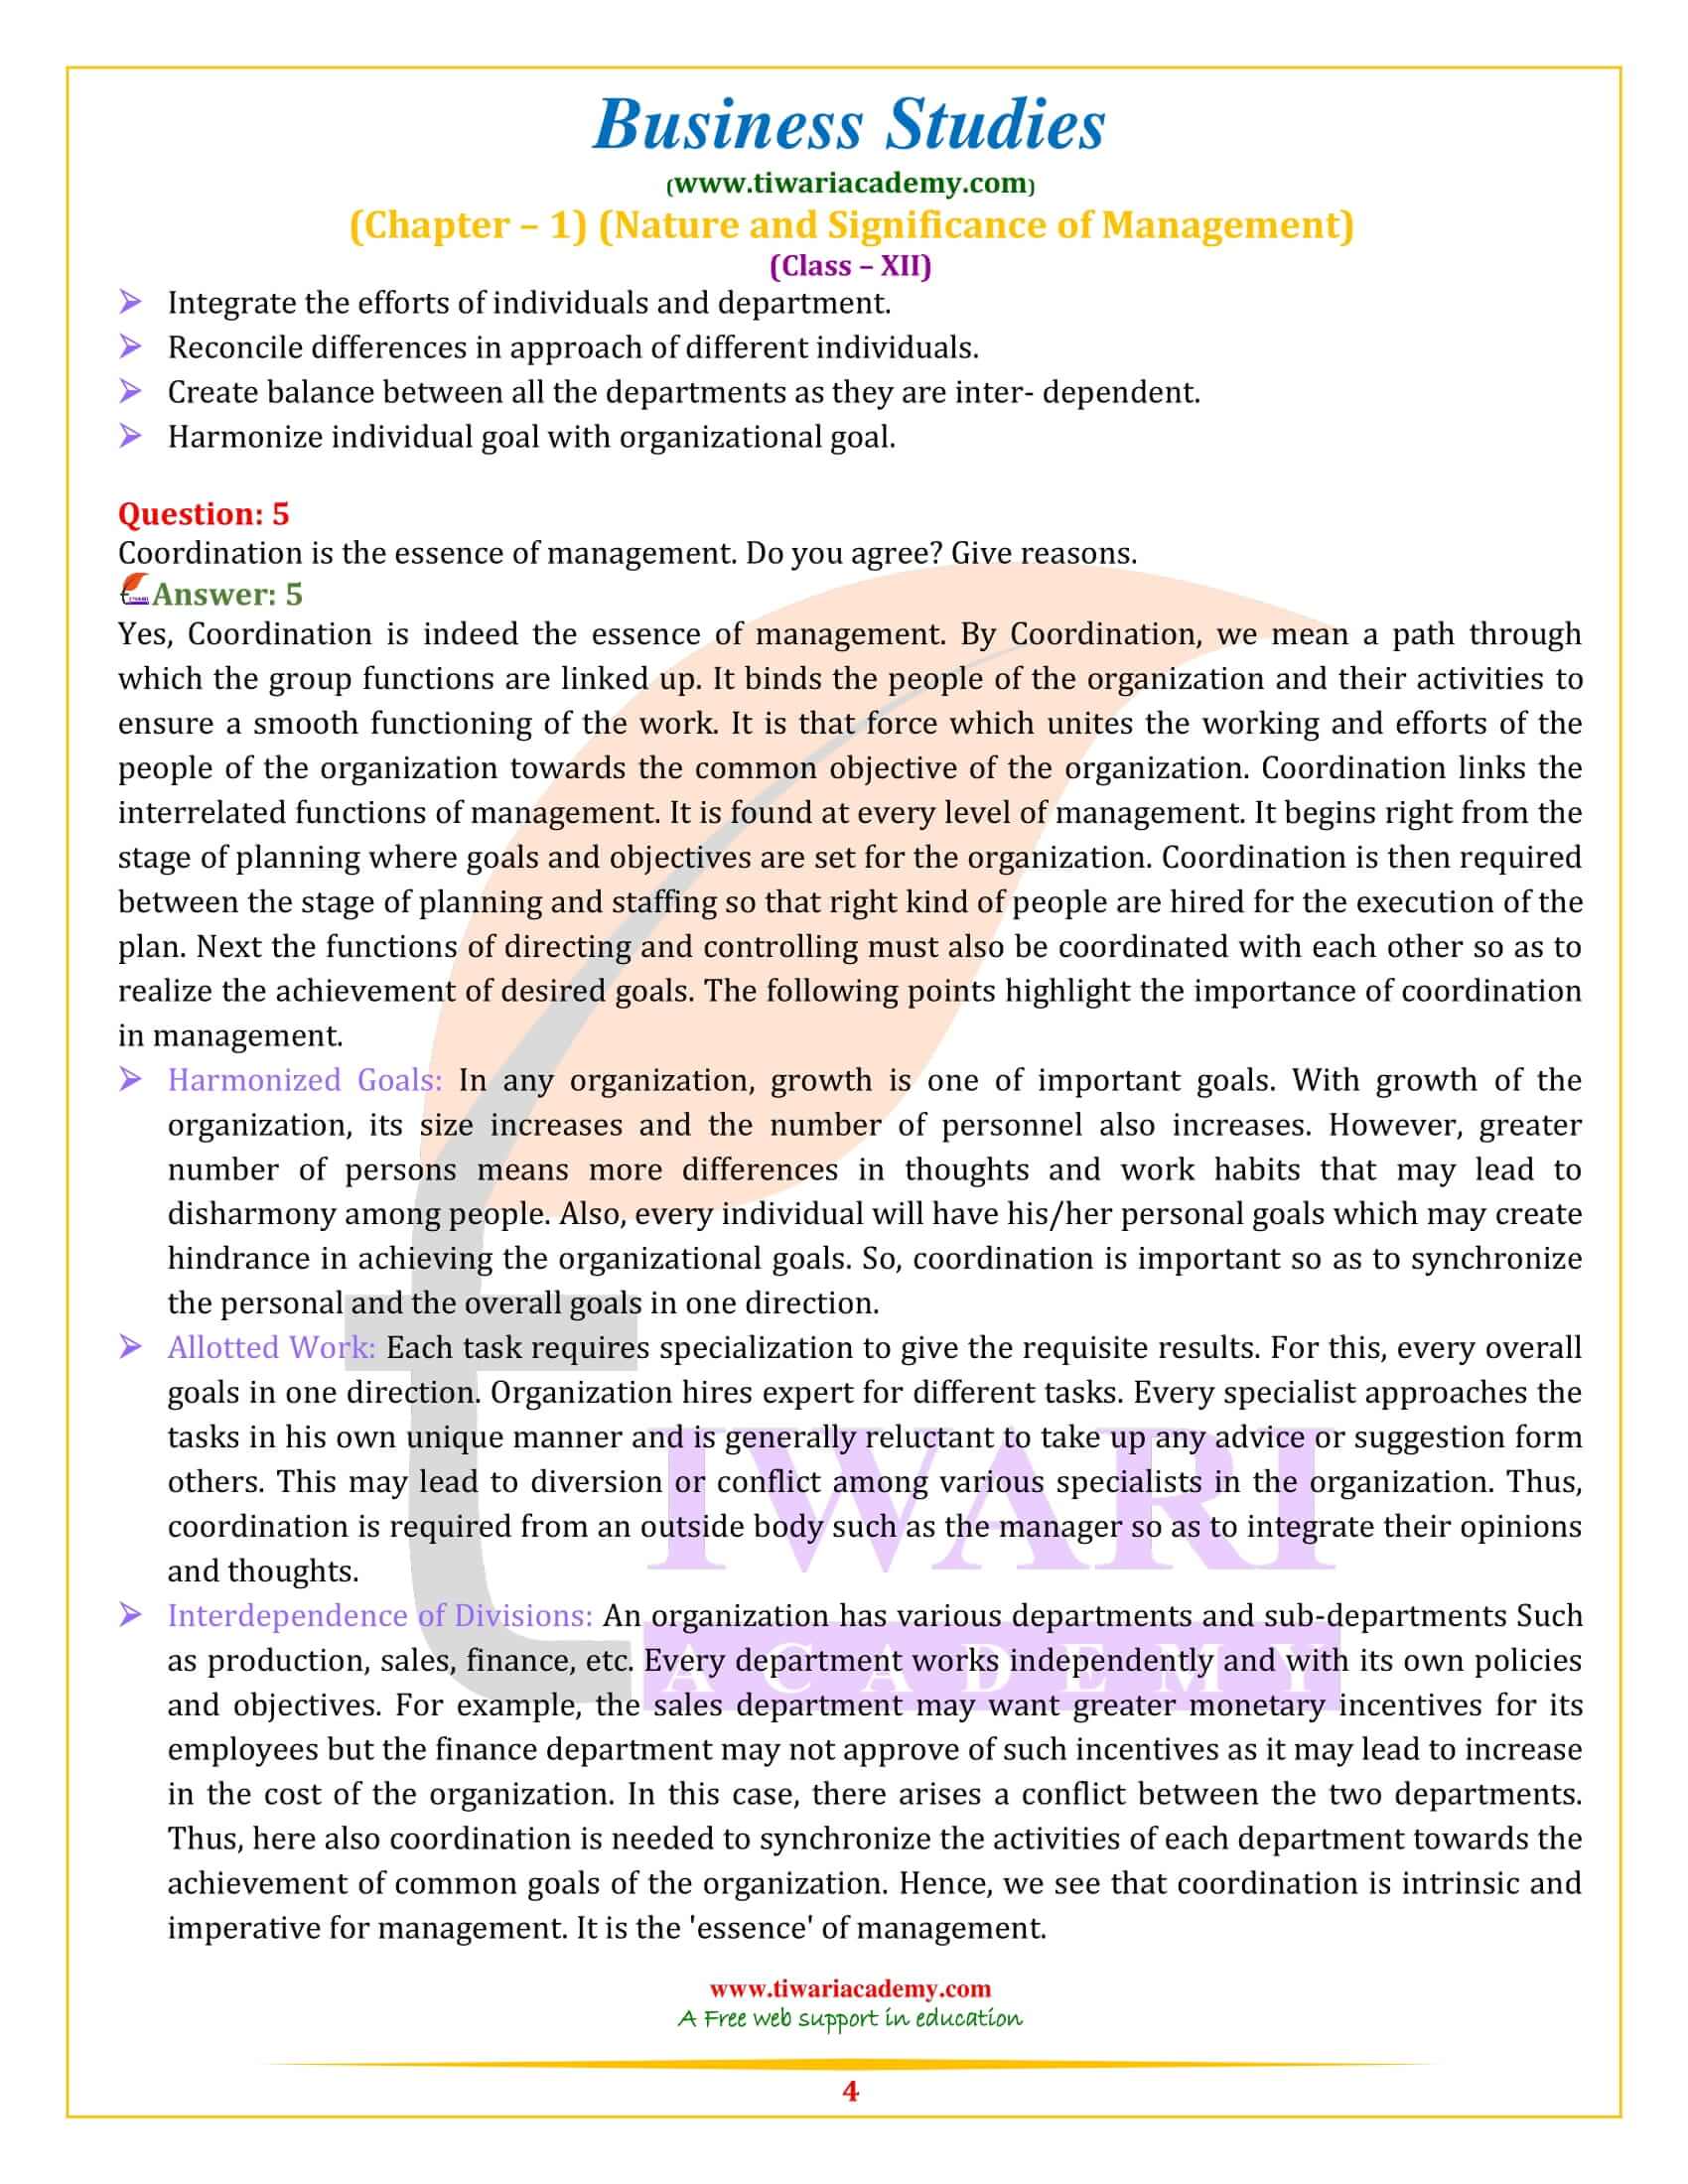 NCERT Solutions for Class 12 Business Studies Chapter 1 pdf